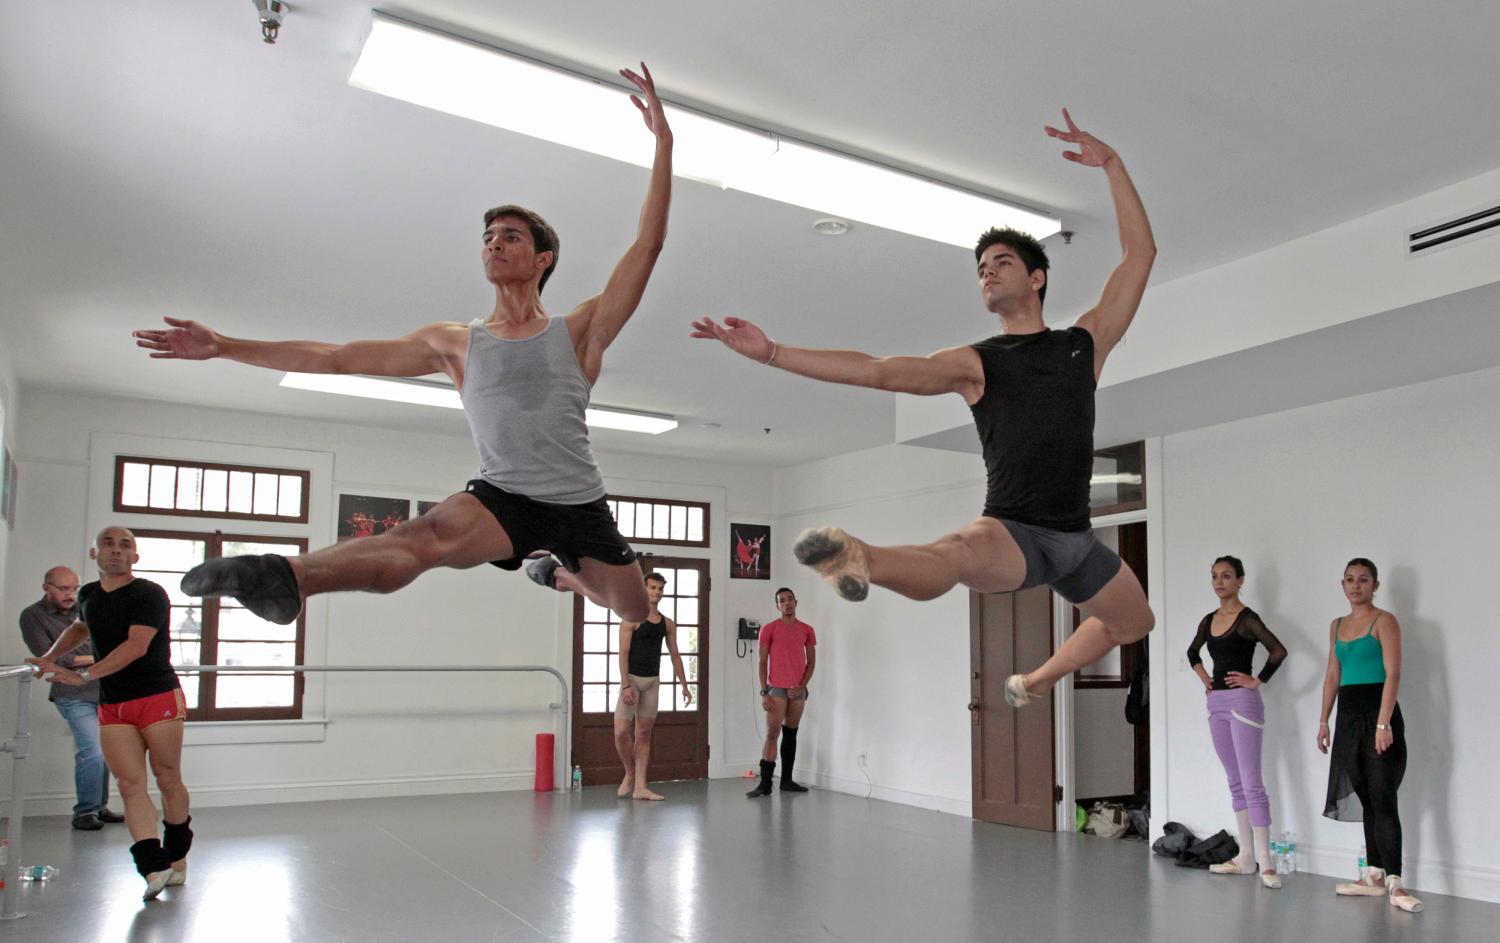 Dancers Josue Justiz (L) and Edward Gonzalez Morgado from the Cuban National Ballet, who defected last month, leap during their audition at the Miami Hispanic Ballet in Miami, Florida April 4, 2013. The Cuban national ballet, known for its adherence to a classical style of ballet and for producing many world-class dancers, regularly makes international tours. Over the years, many of its dancers have defected and joined other companies abroad. Others have been allowed to leave Cuba freely, including Carlos Acosta with the Royal Ballet in London and Jose Manuel Carreno, who retired in 2011 as a much revered principal dancer at the American Ballet Theatre in New York. REUTERS/Joe Skipper (UNITED STATES - Tags: POLITICS SOCIETY IMMIGRATION) - RTXY8T3